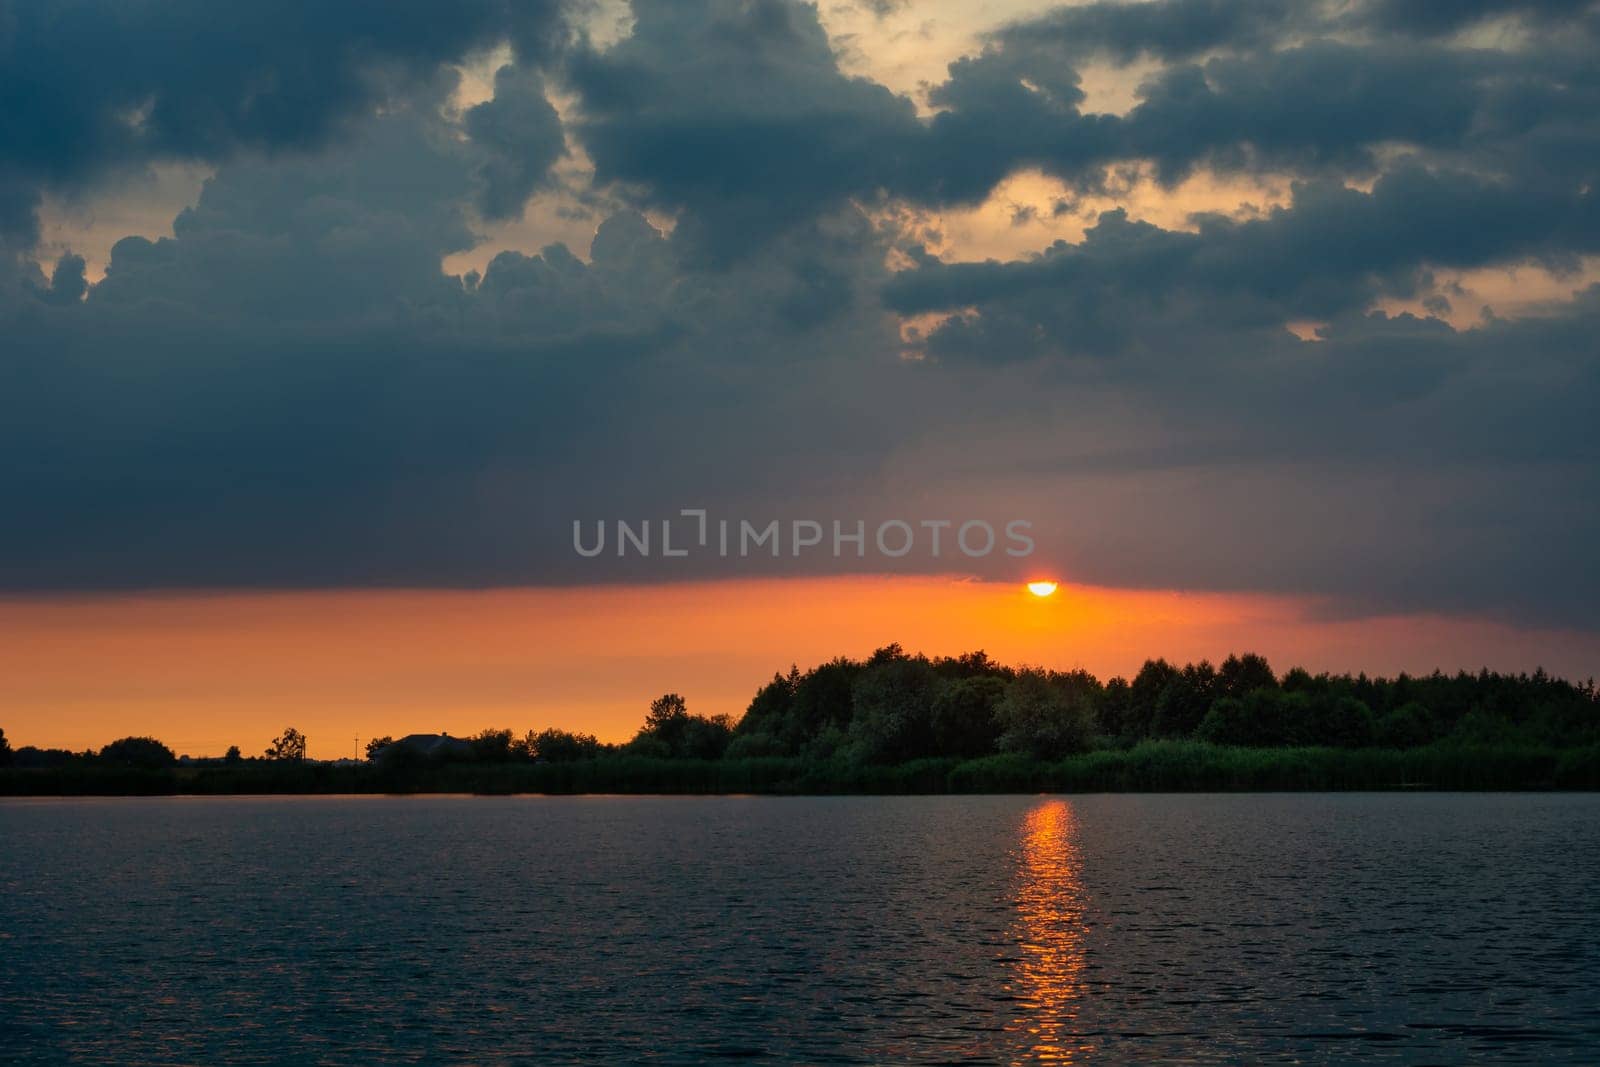 Sunset with dark clouds over the calm lake